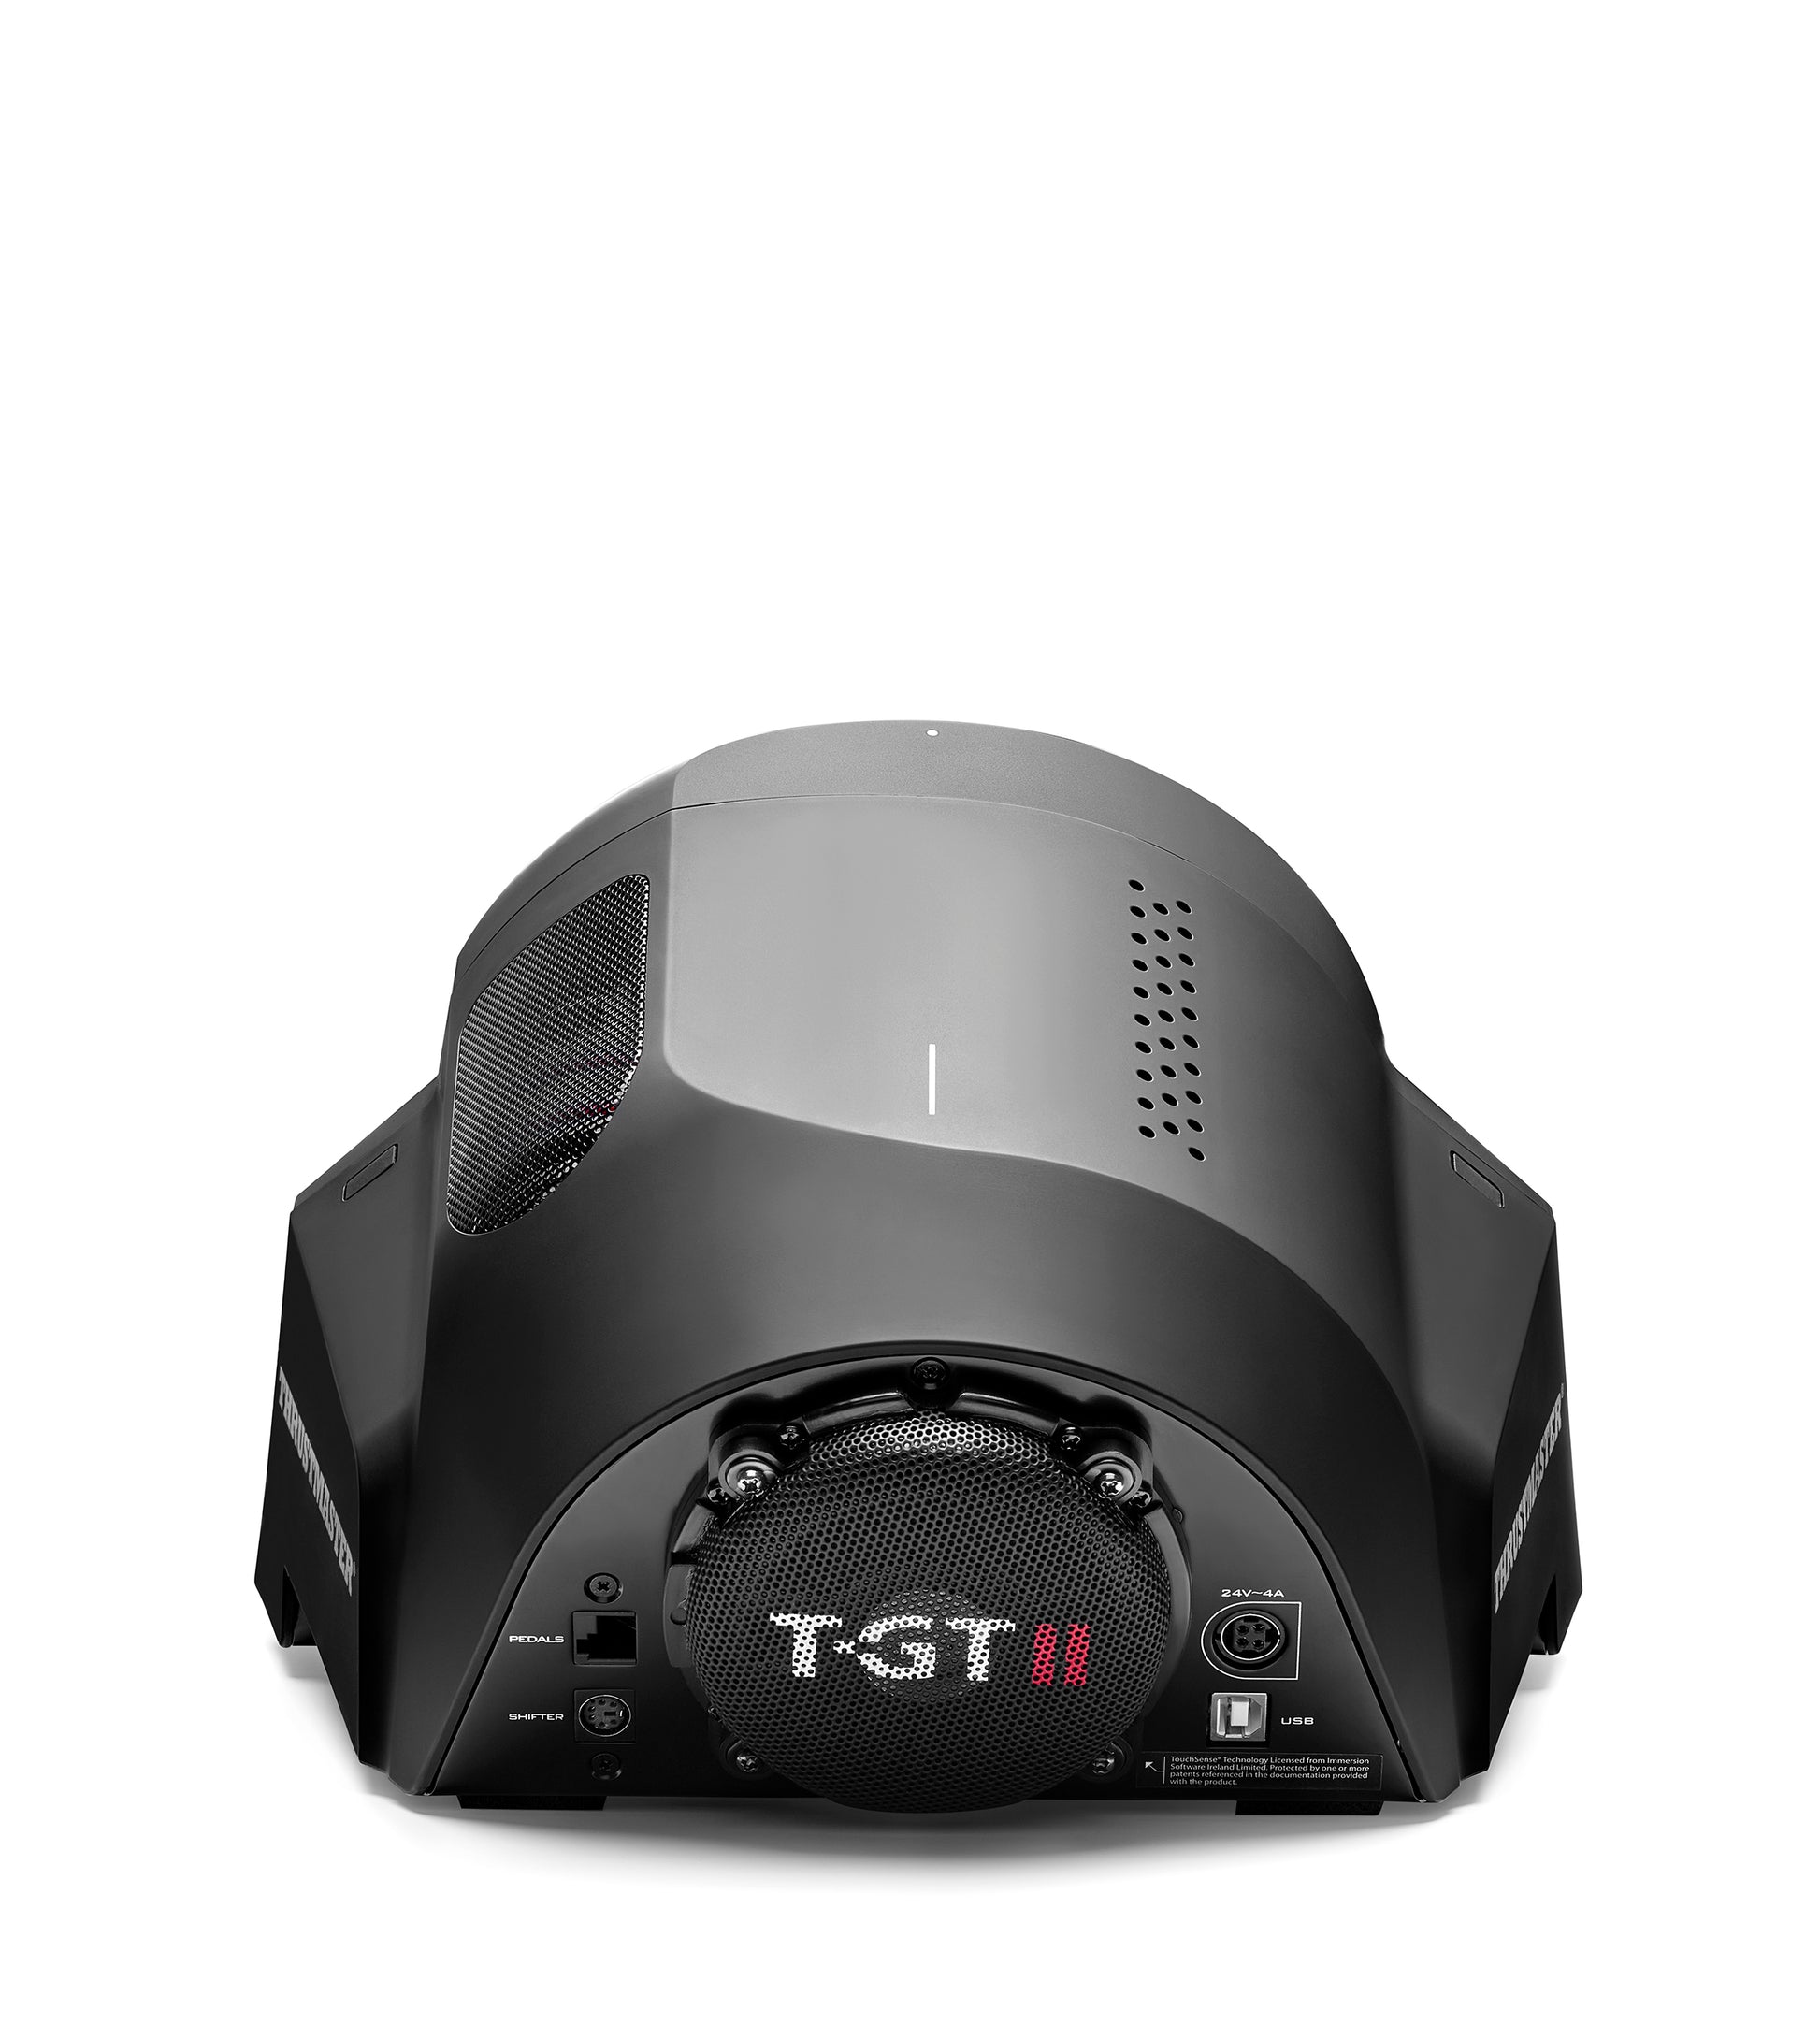  ThrustMaster T-GT II Servo Base - Force Feedback Wheel base -  Officially licensed for both PlayStation 5 and Gran Turismo - PS5 / PS4 /PC  : Video Games